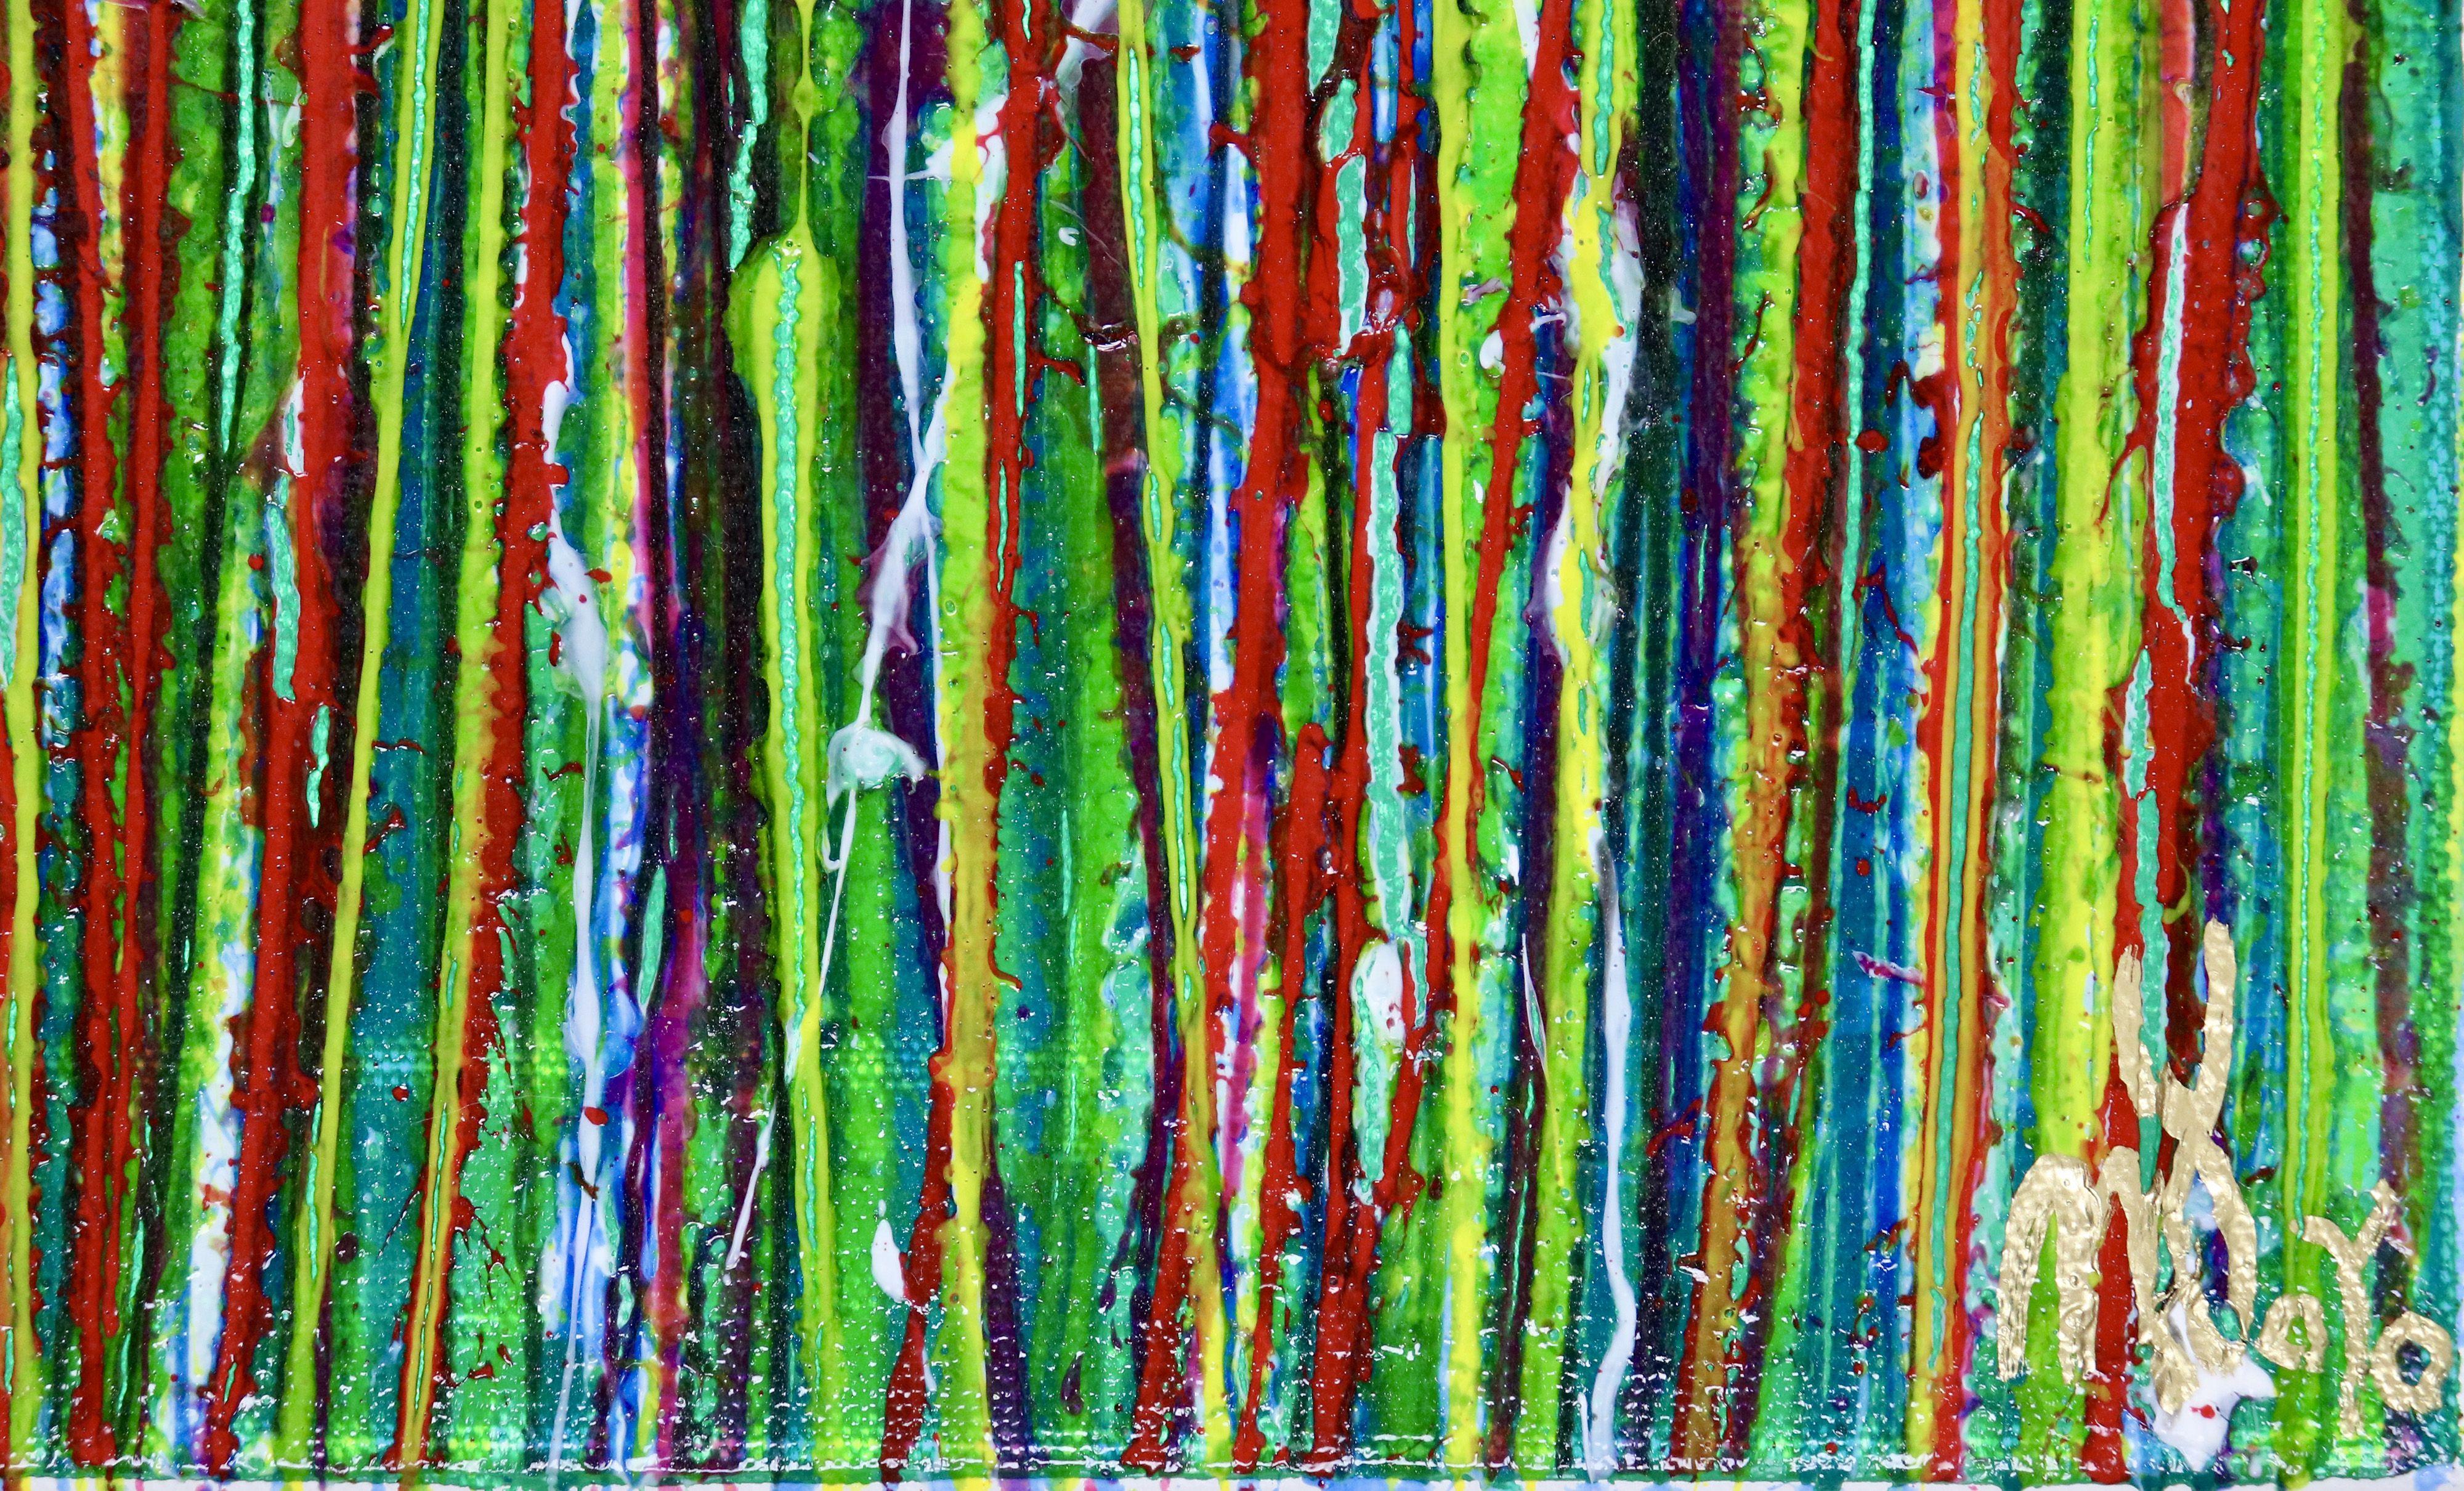 Daydream panorama (Natures imagery) 13, Painting, Acrylic on Canvas 2